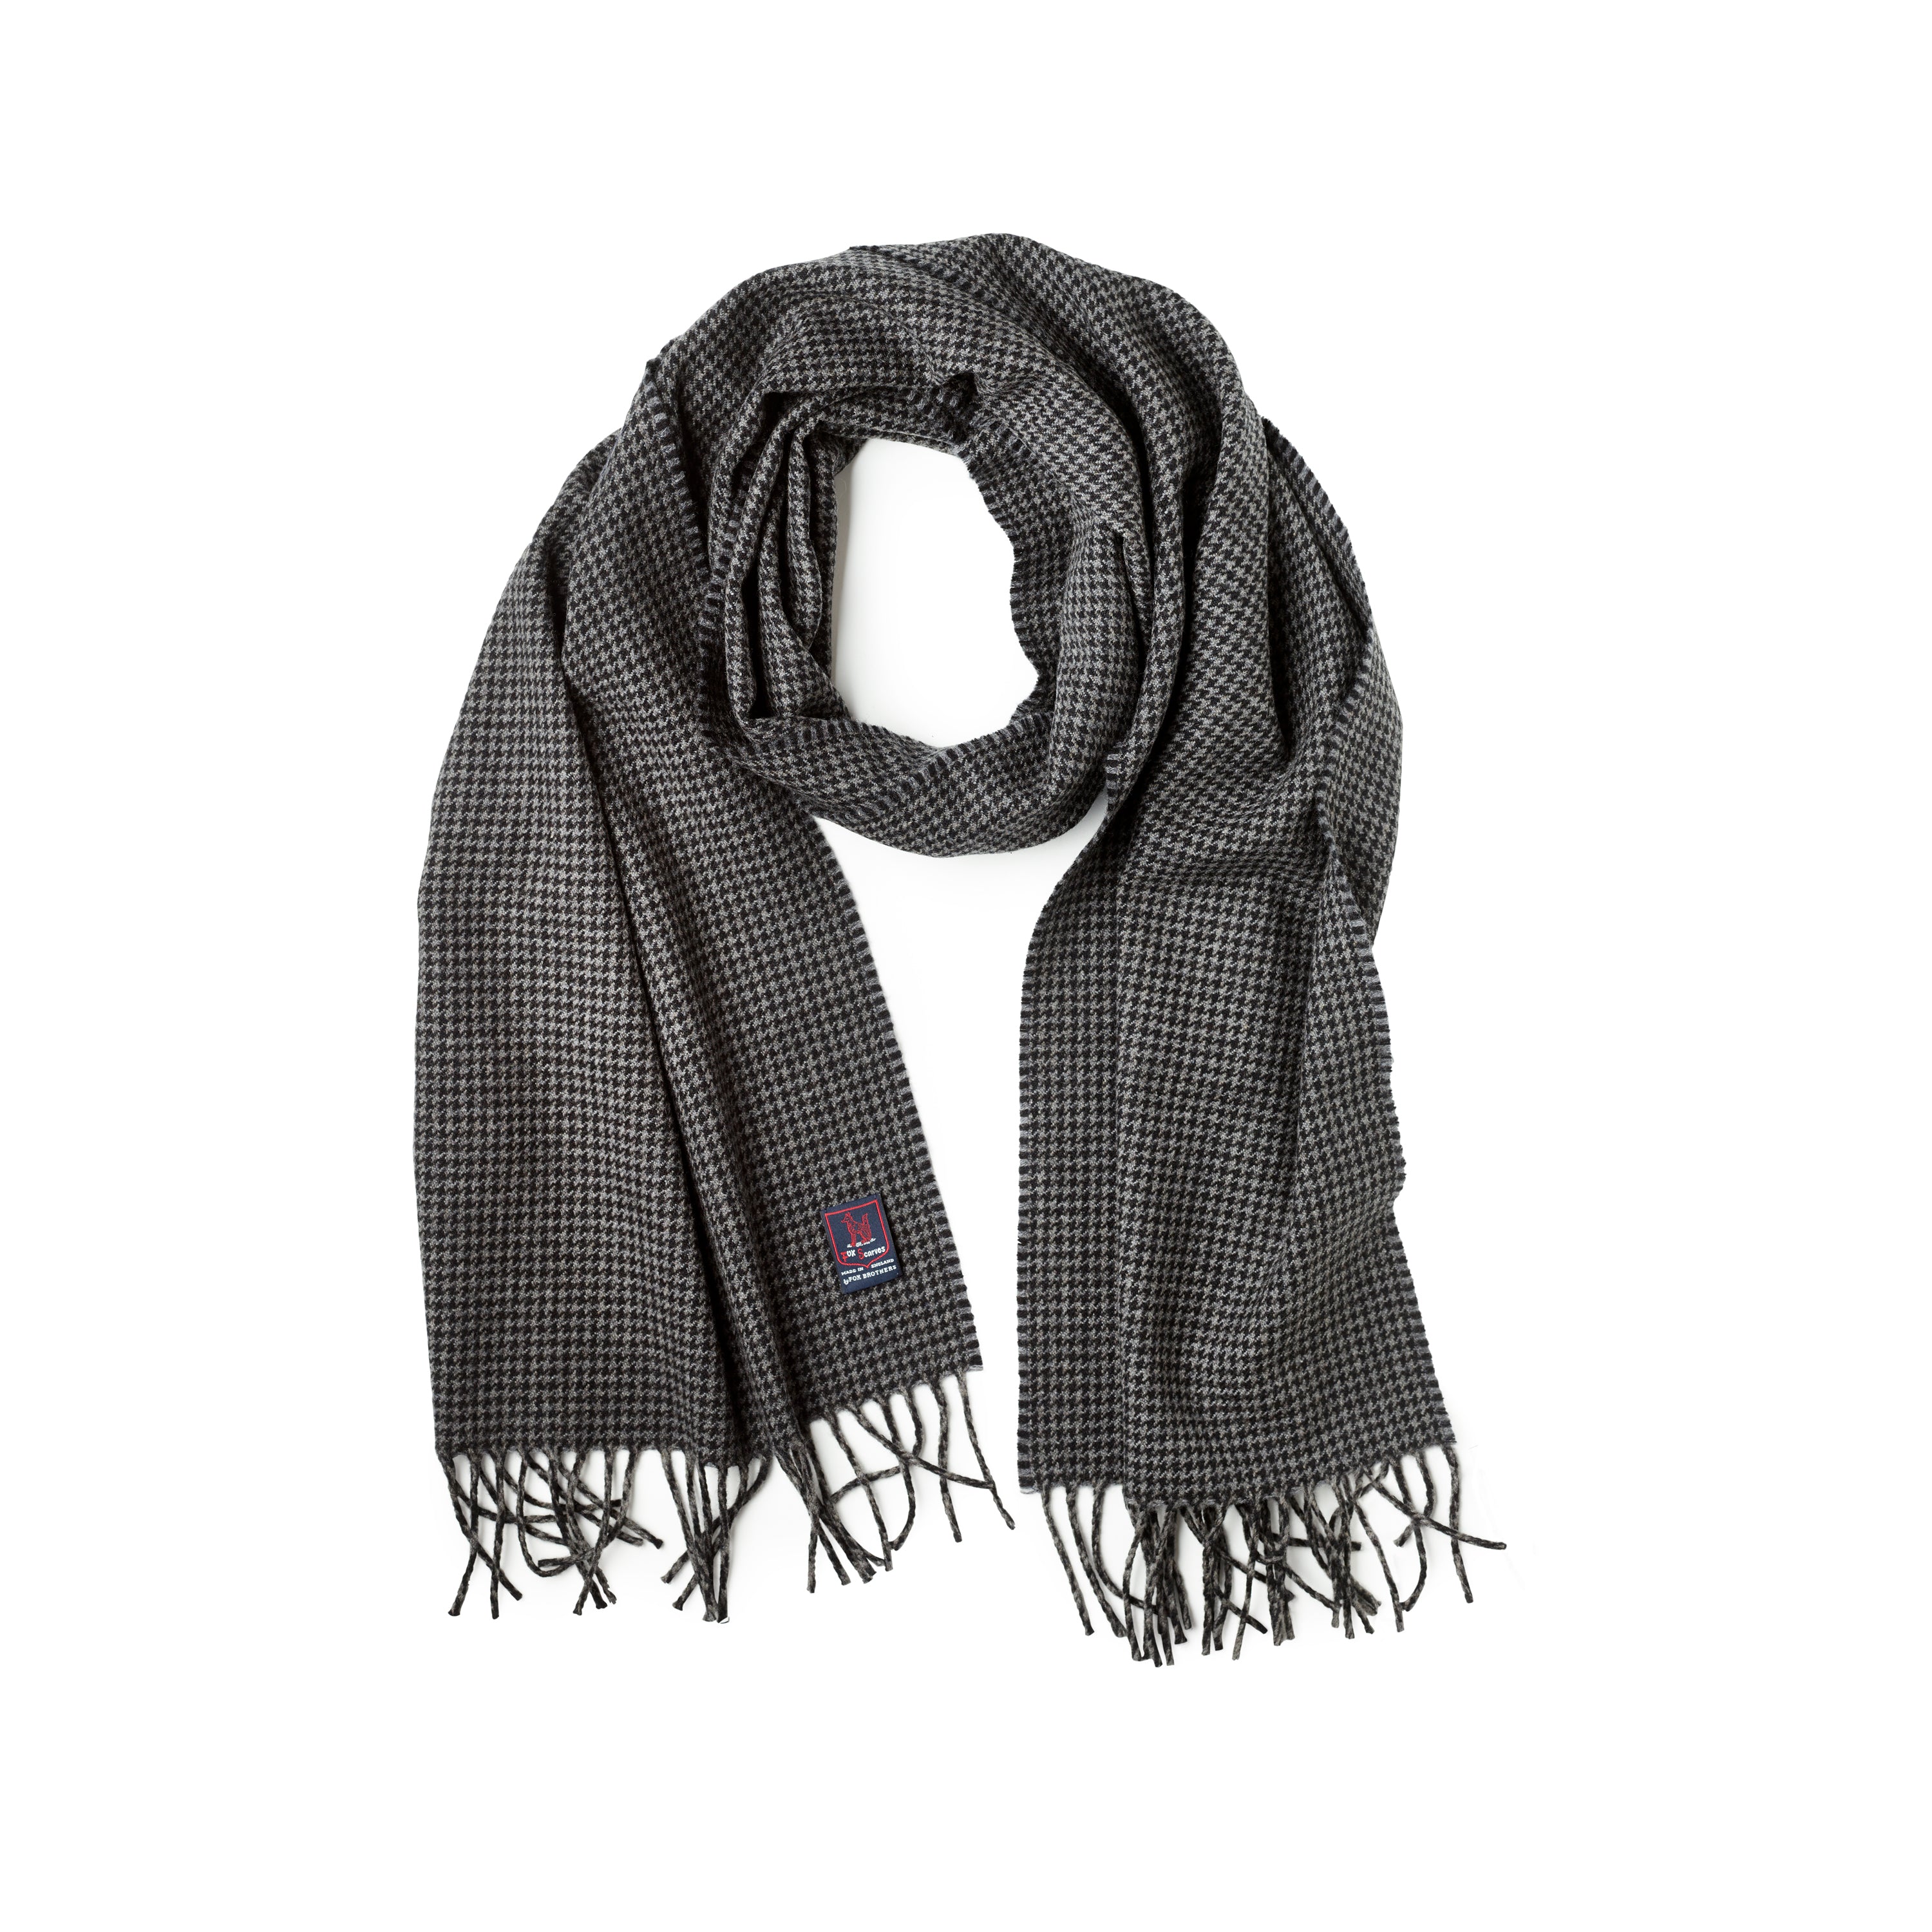 Fox Charcoal Houndstooth Cashmere & Merino Wool Scarf